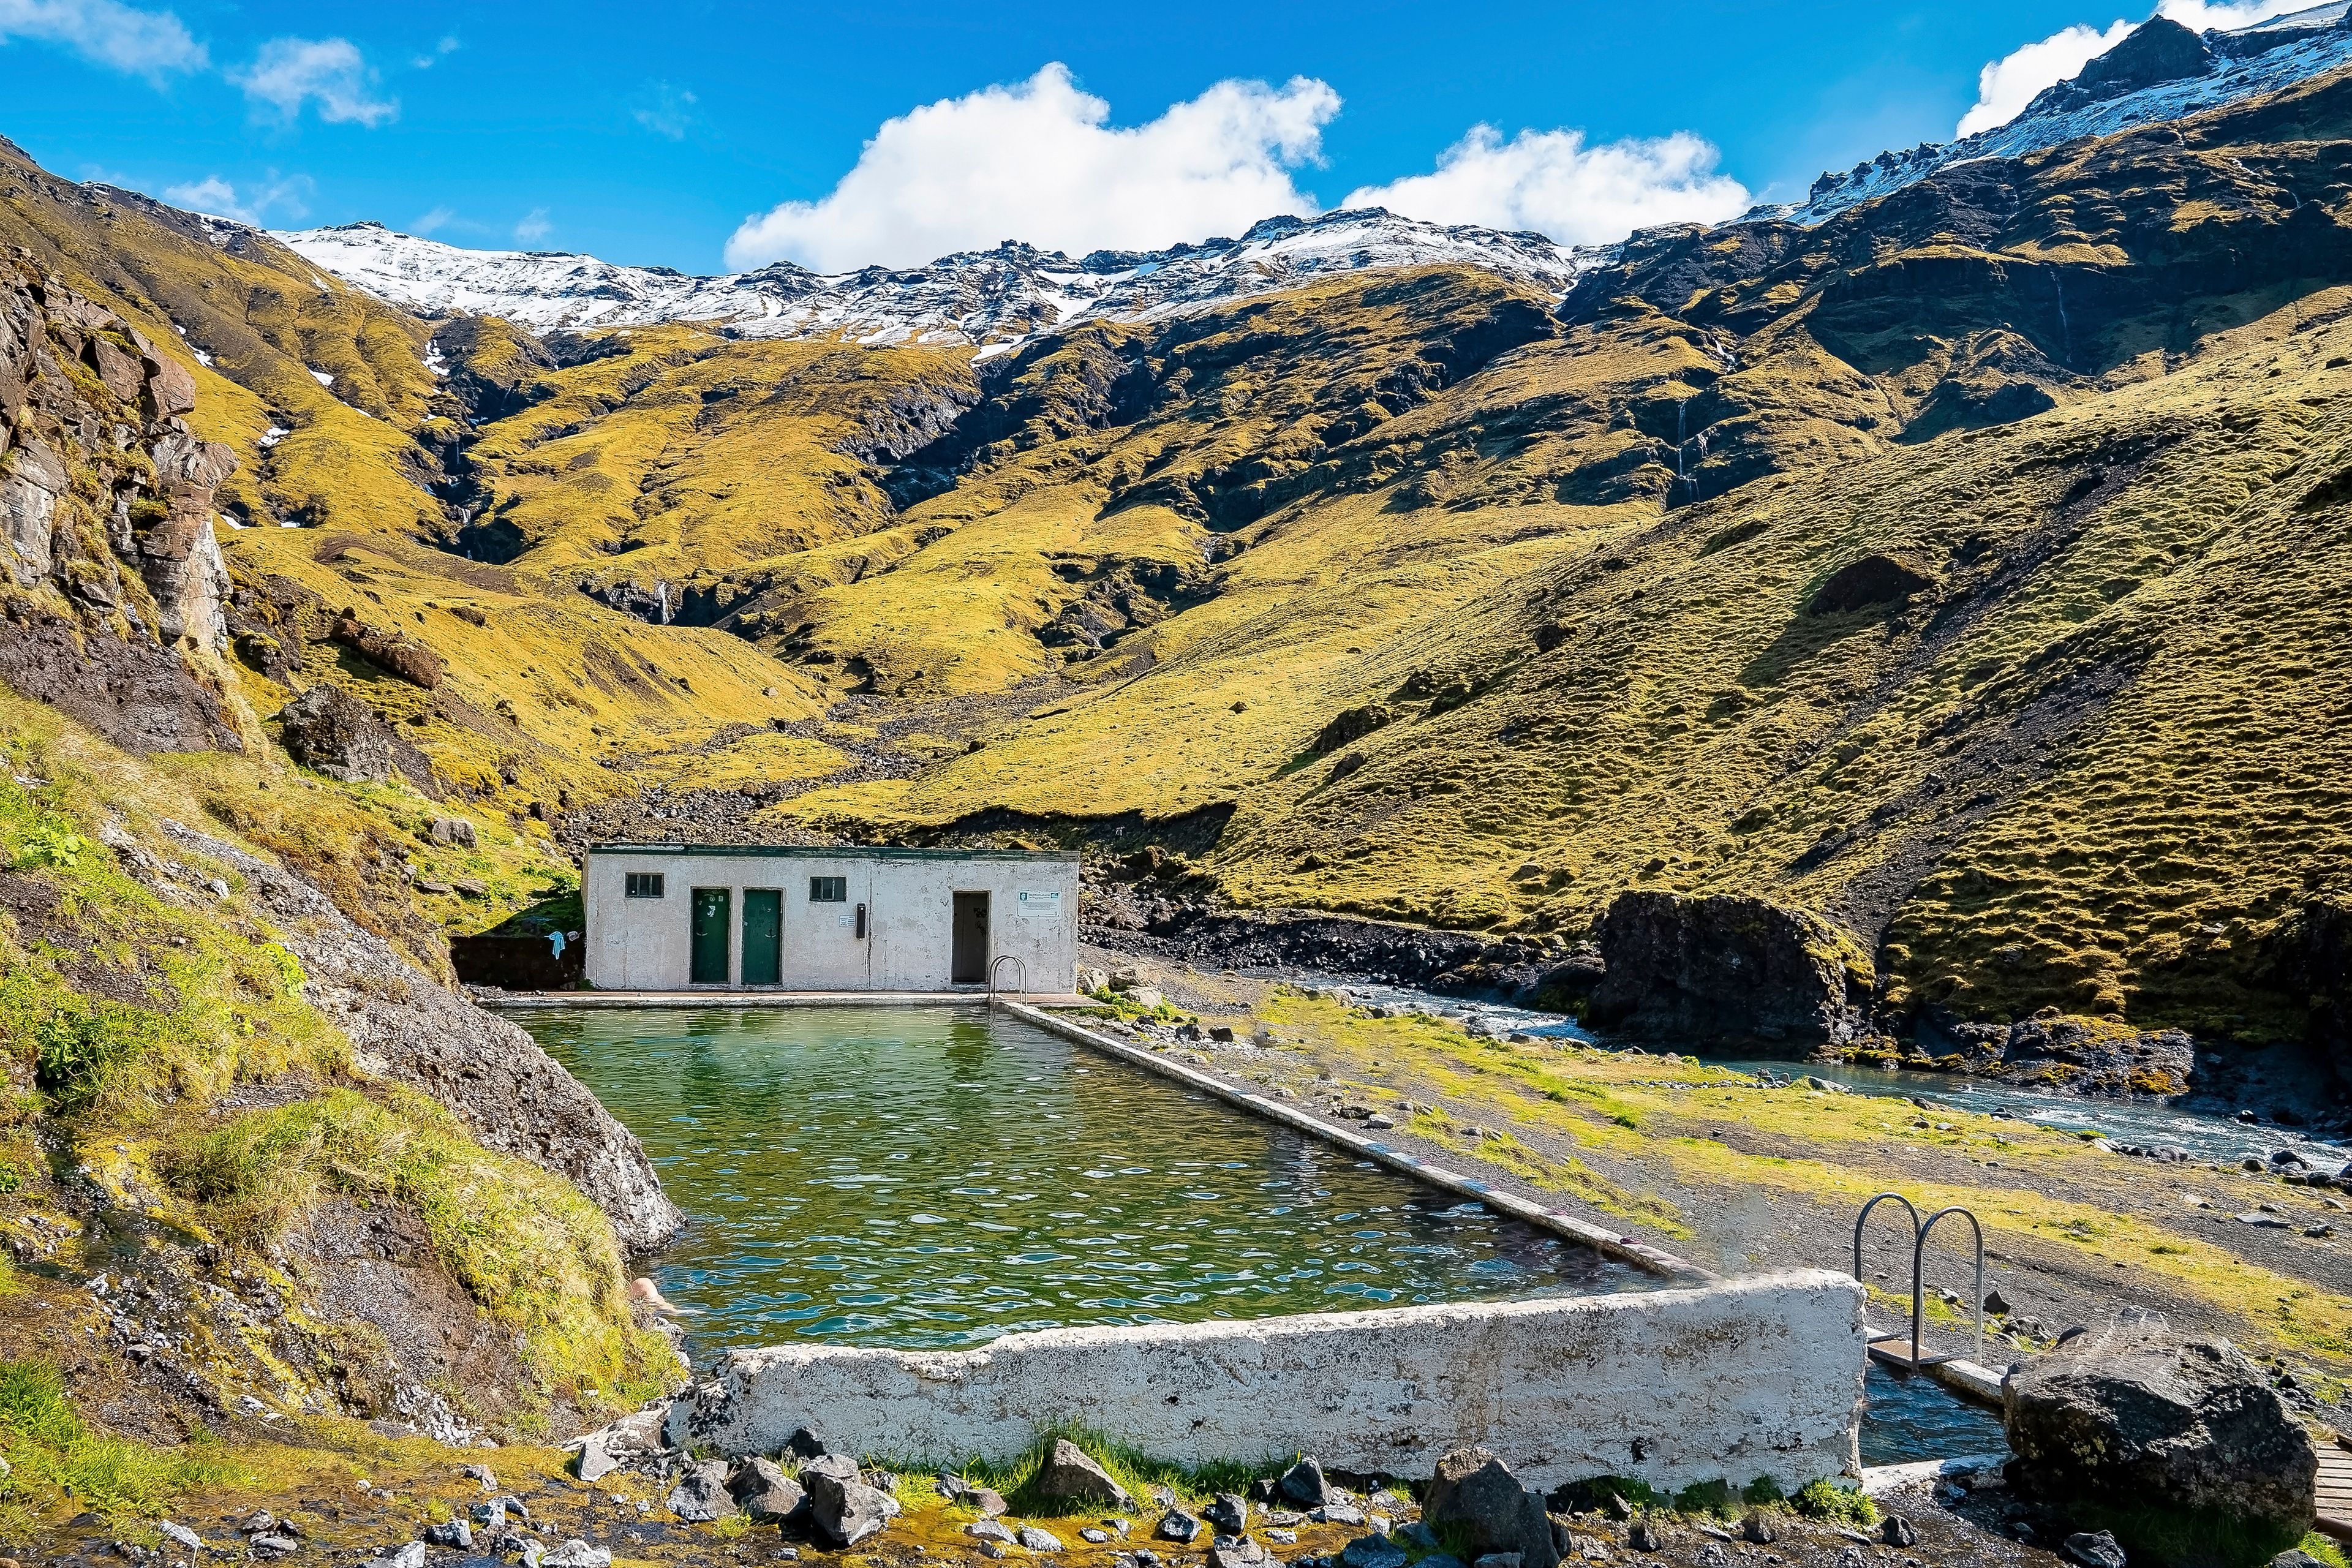 Visit iceland and dive into this natural geothermal pool that is naturally heated in the middle of mountains in Iceland